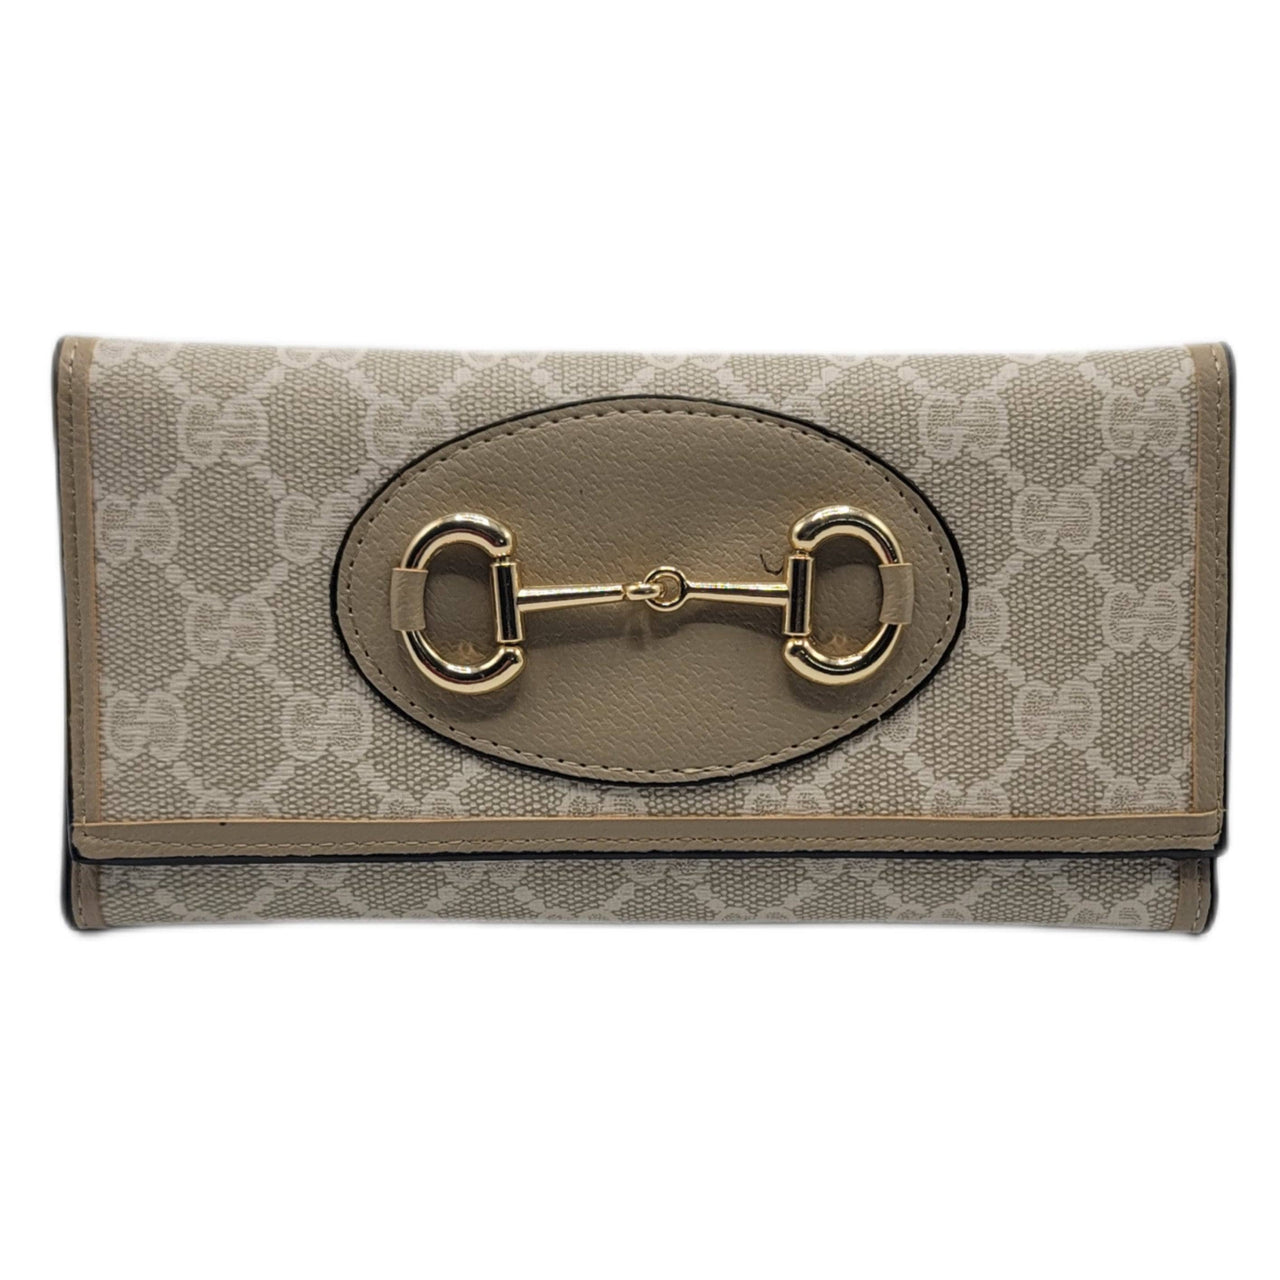 The Bag Couture Luggage & Bags Gucci 3 Fold Wallet Classic Cuffs Beige